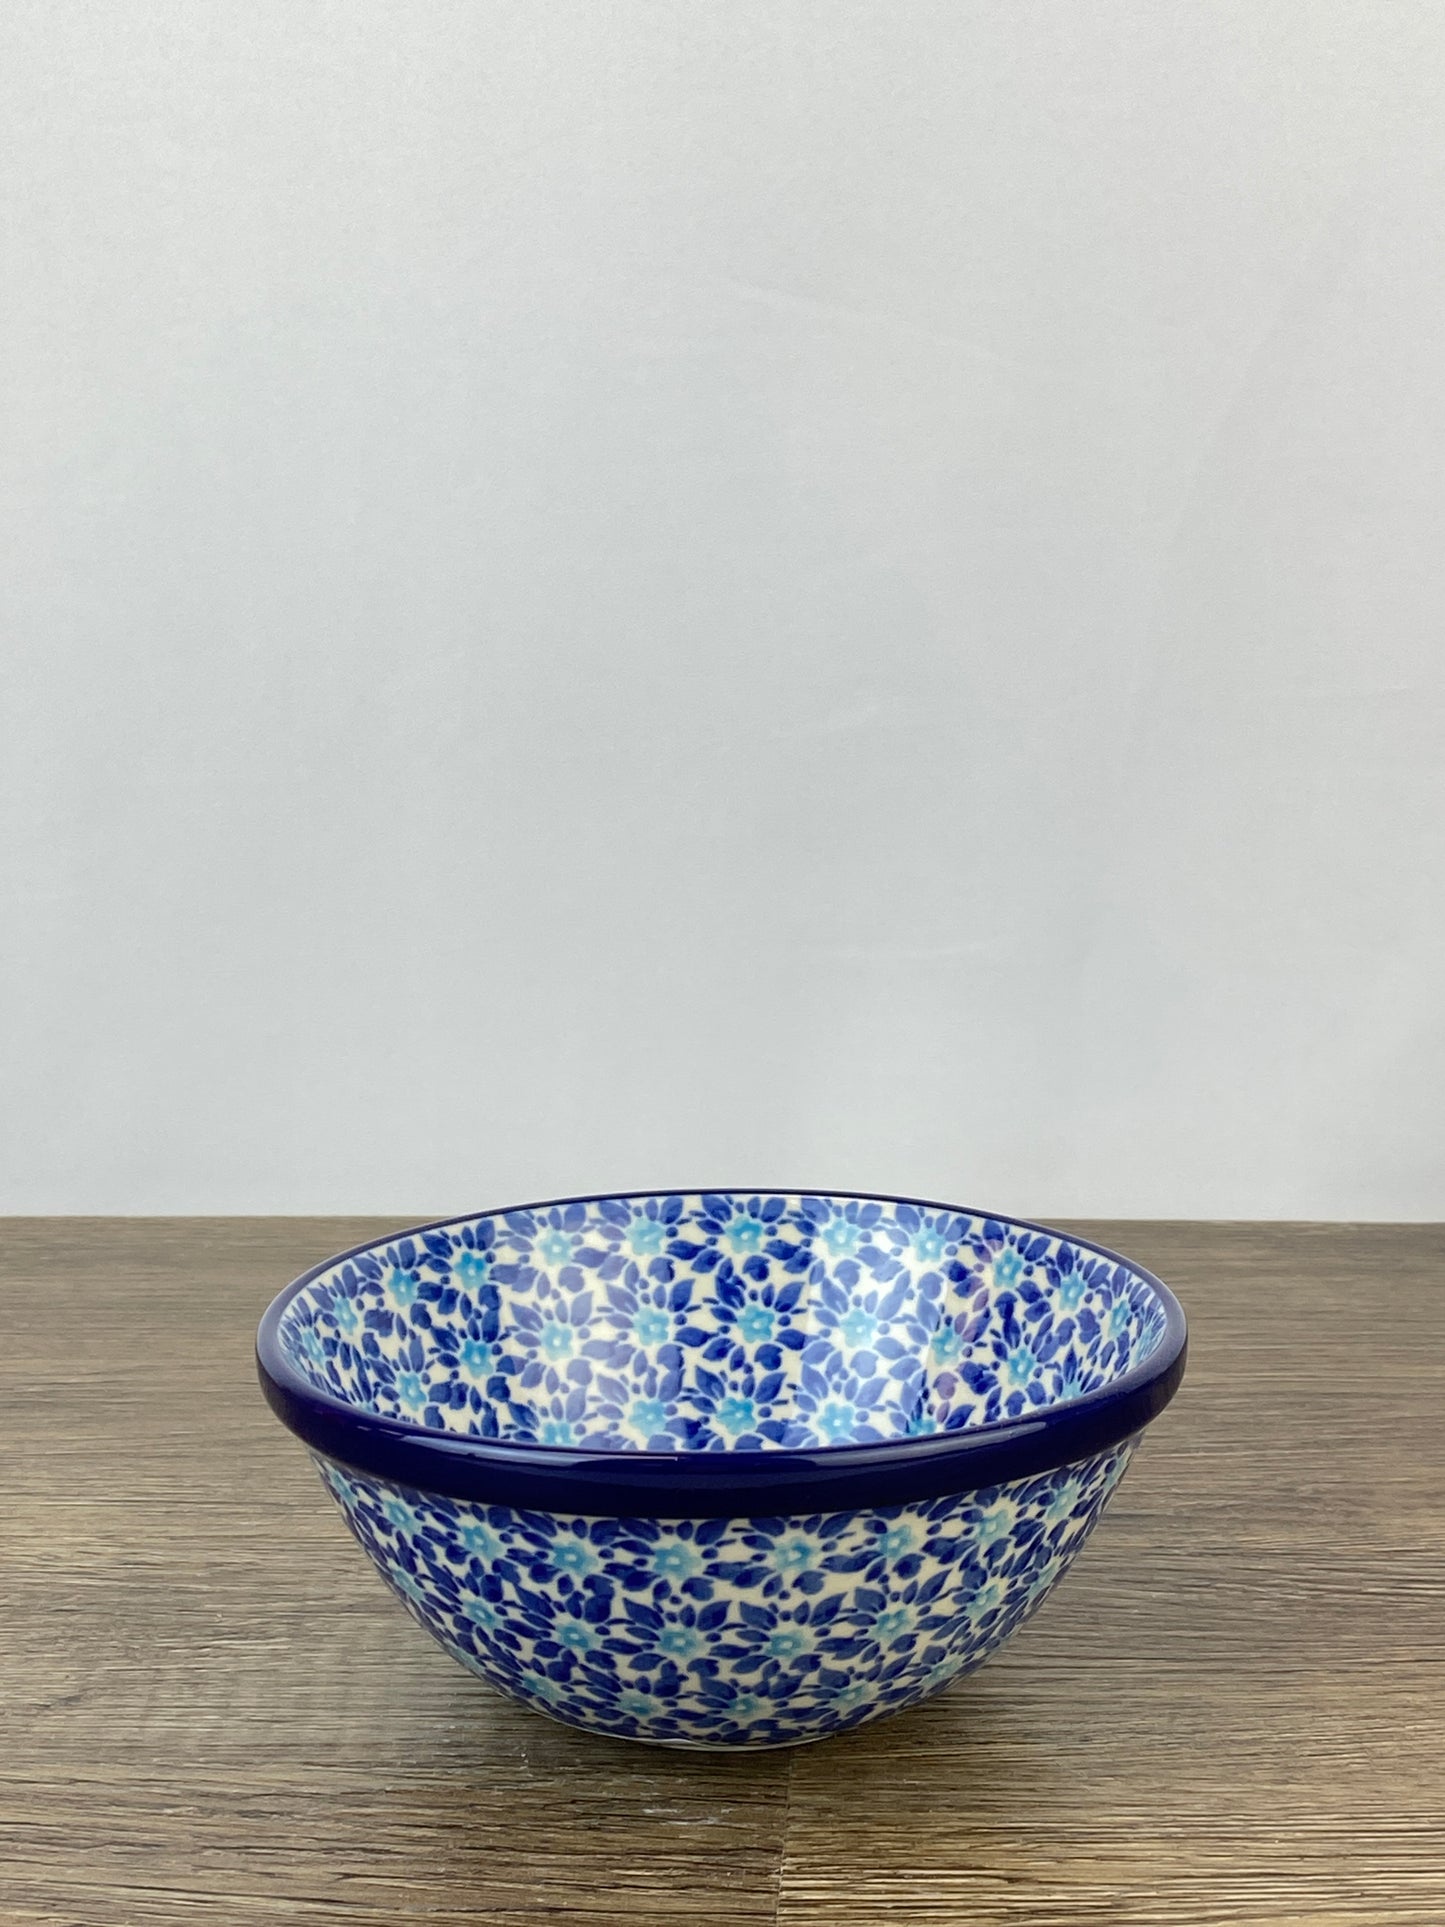 SALE Small Cereal Bowl - Shape 59 - Pattern 2394